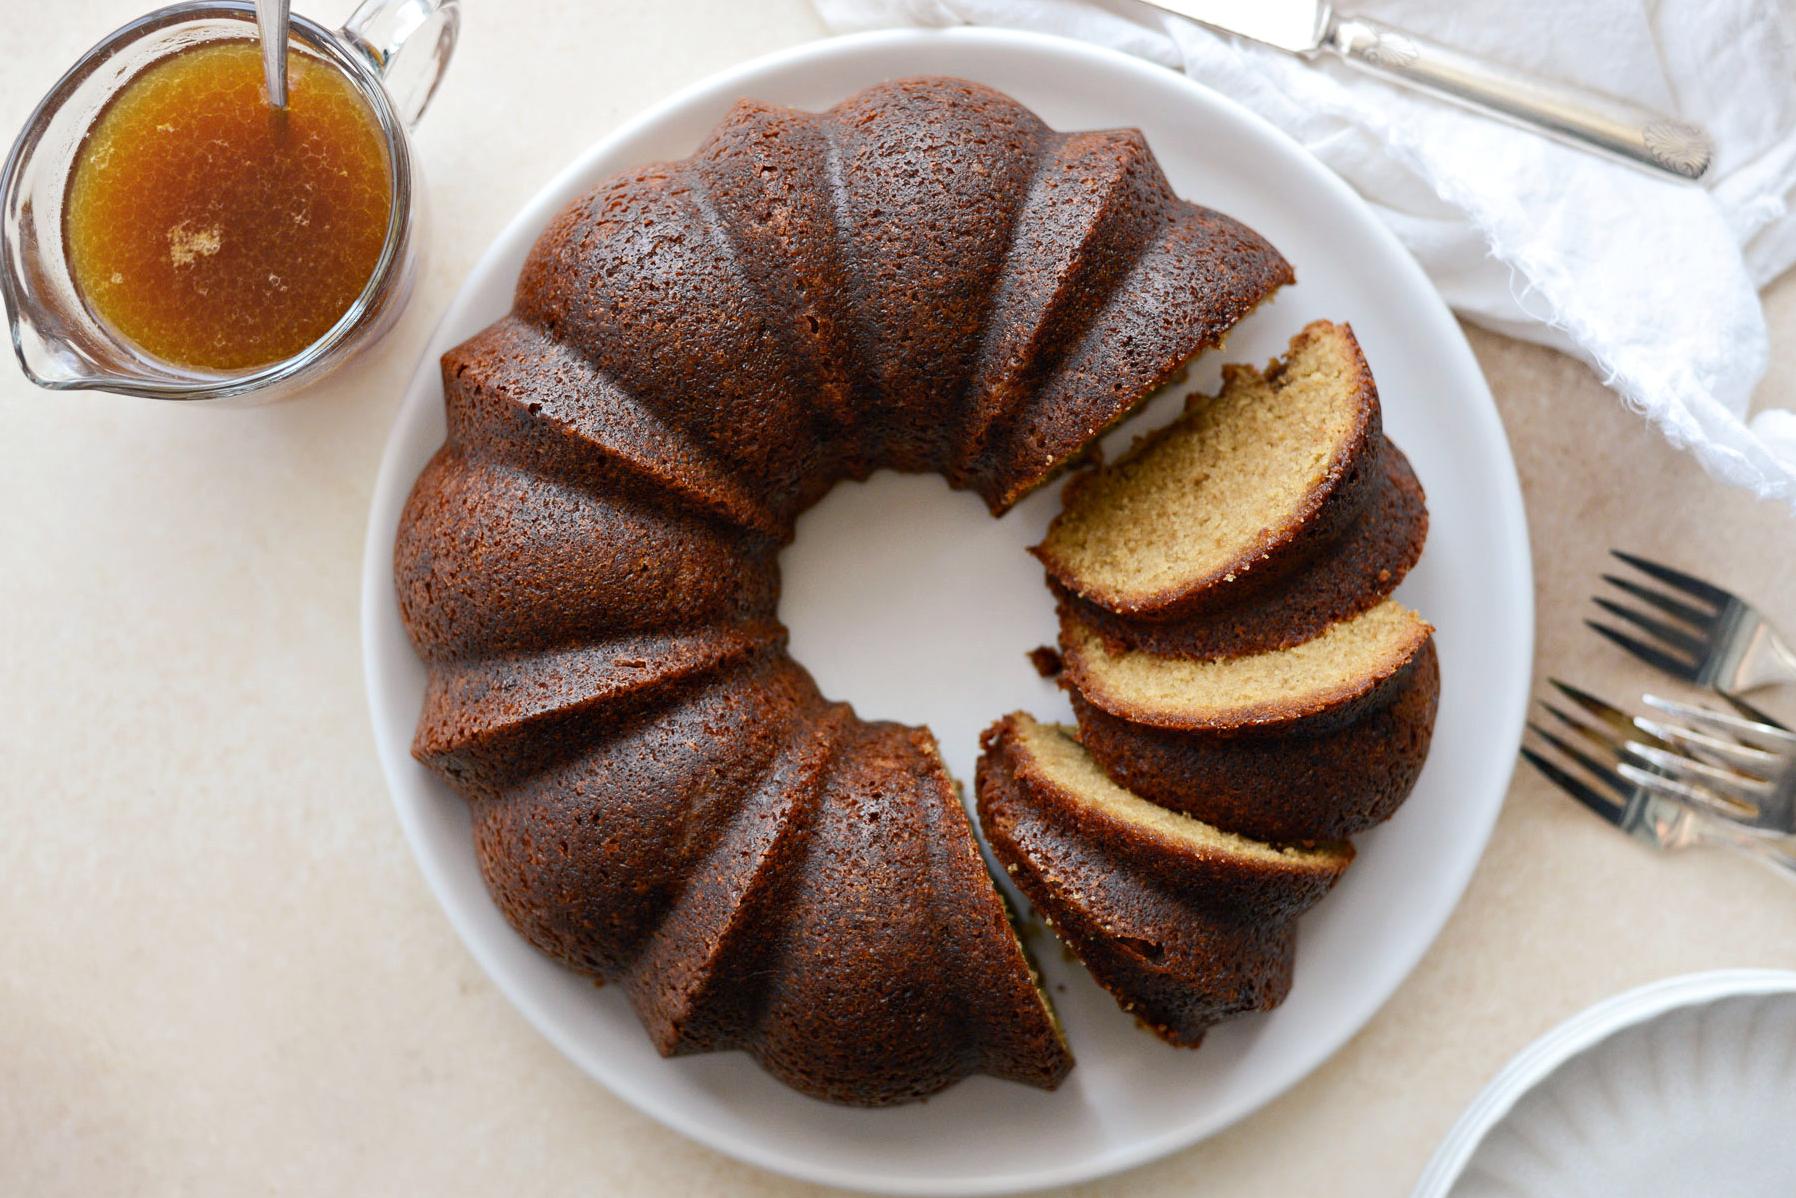  Smothered in a rich whiskey-infused glaze, this cake is a dream come true for whiskey lovers.